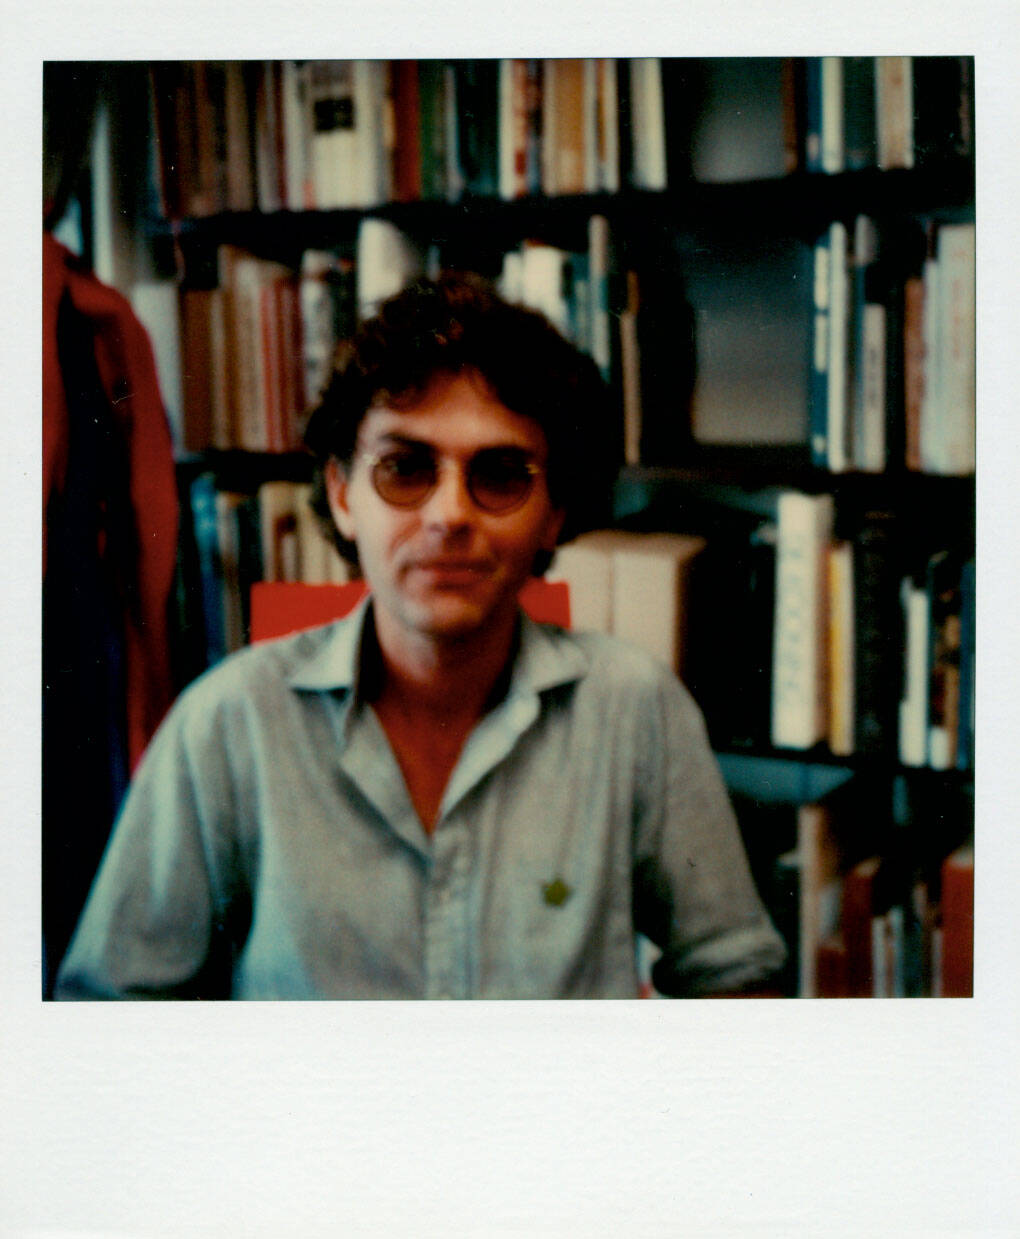 <p>Ron at the EH McCormick Library, 1979</p>